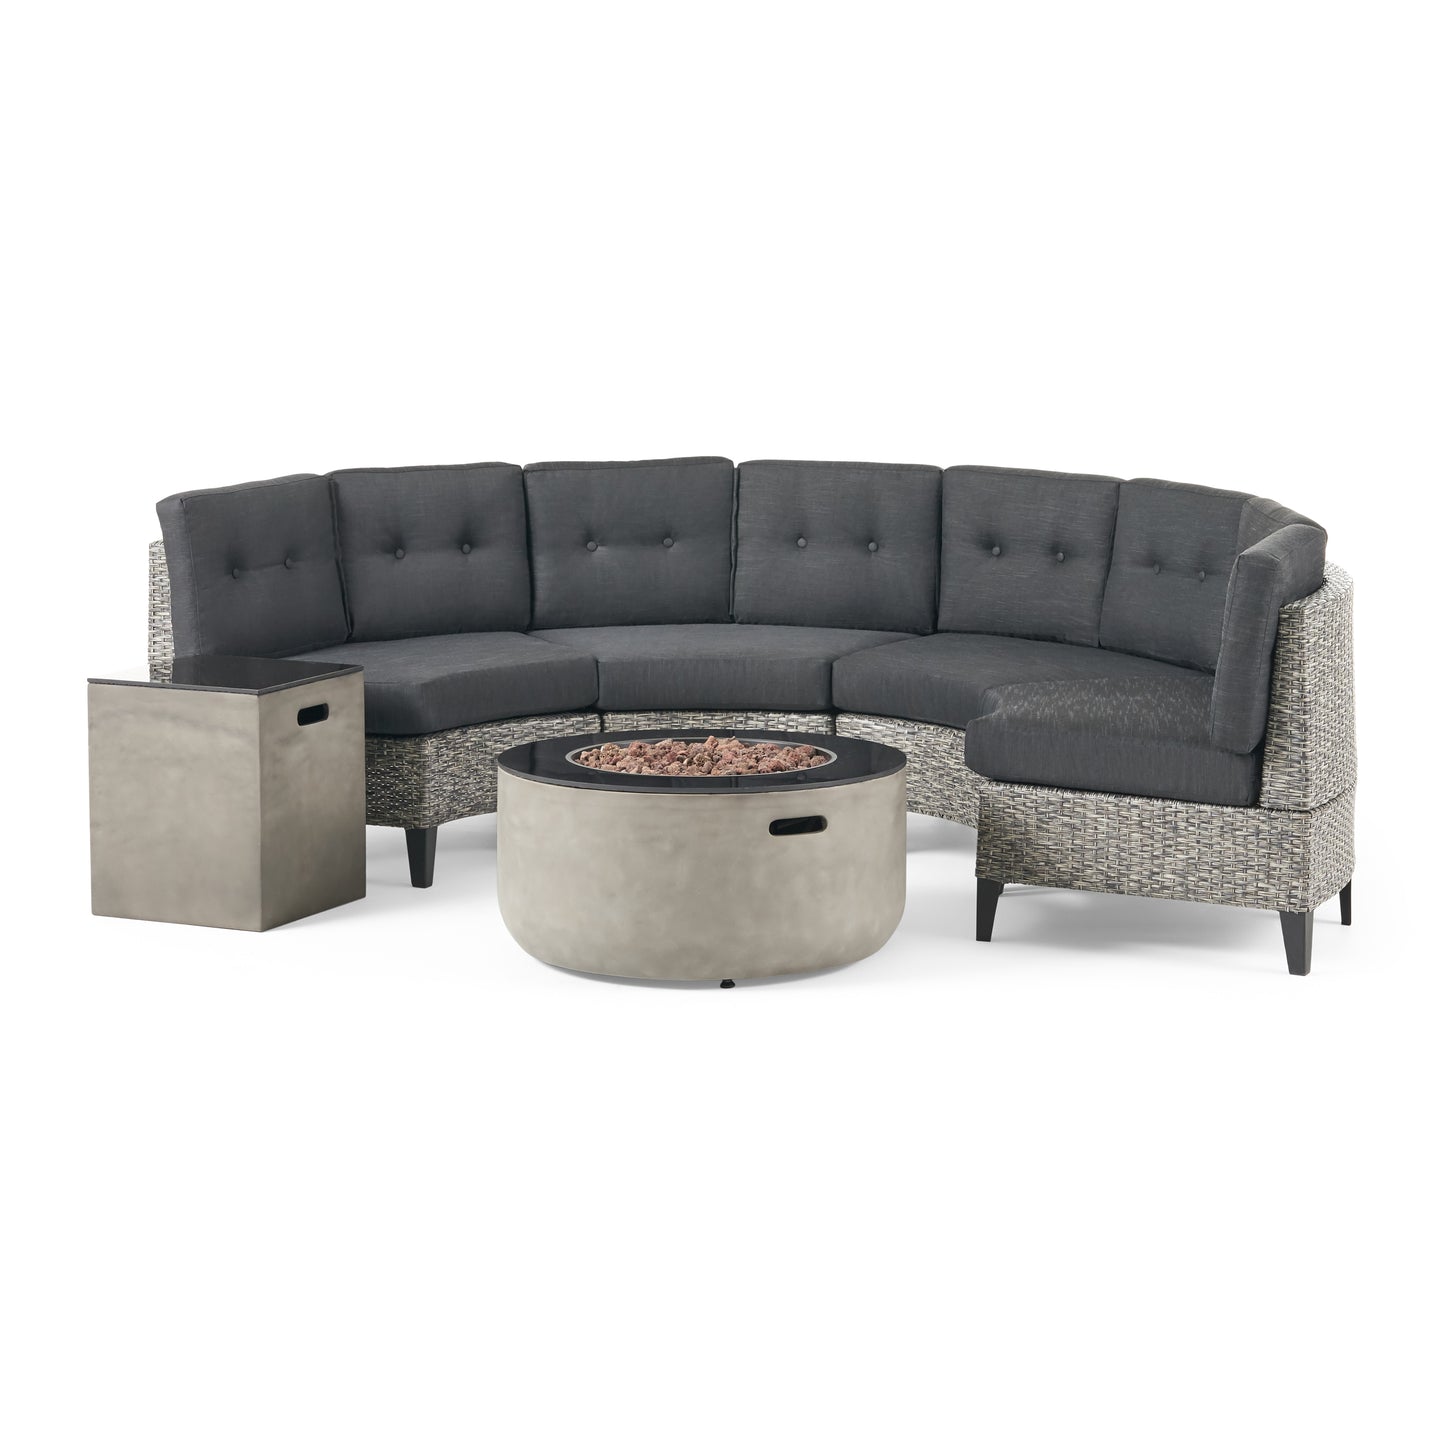 Breann Outdoor Round 4 Seater Wicker Sectional Set with Fire Pit and Tank Holder